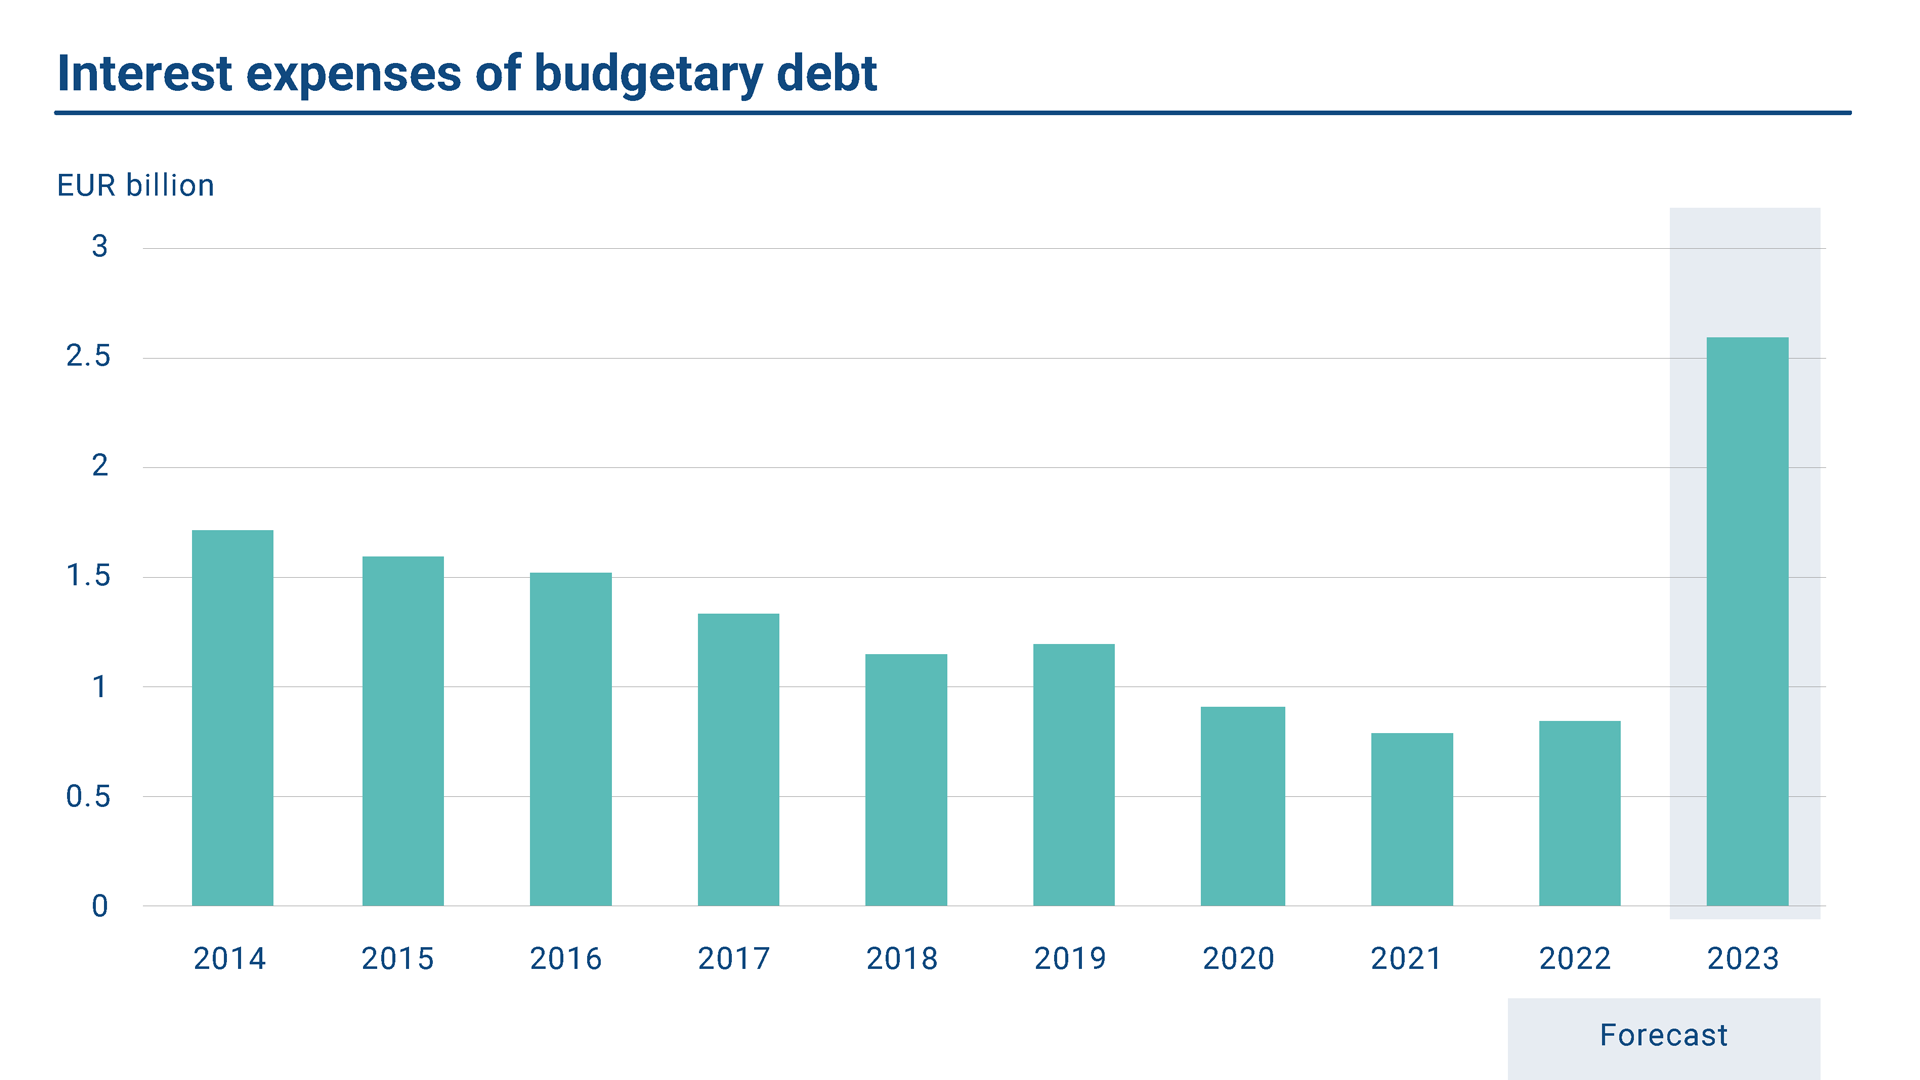 The statistics present the annual interest expenses of budgetary debt in 2014-23. In 2022 the interest expenses were EUR 0.8 billion. The forecast for 2023 is EUR 2.6 billion.